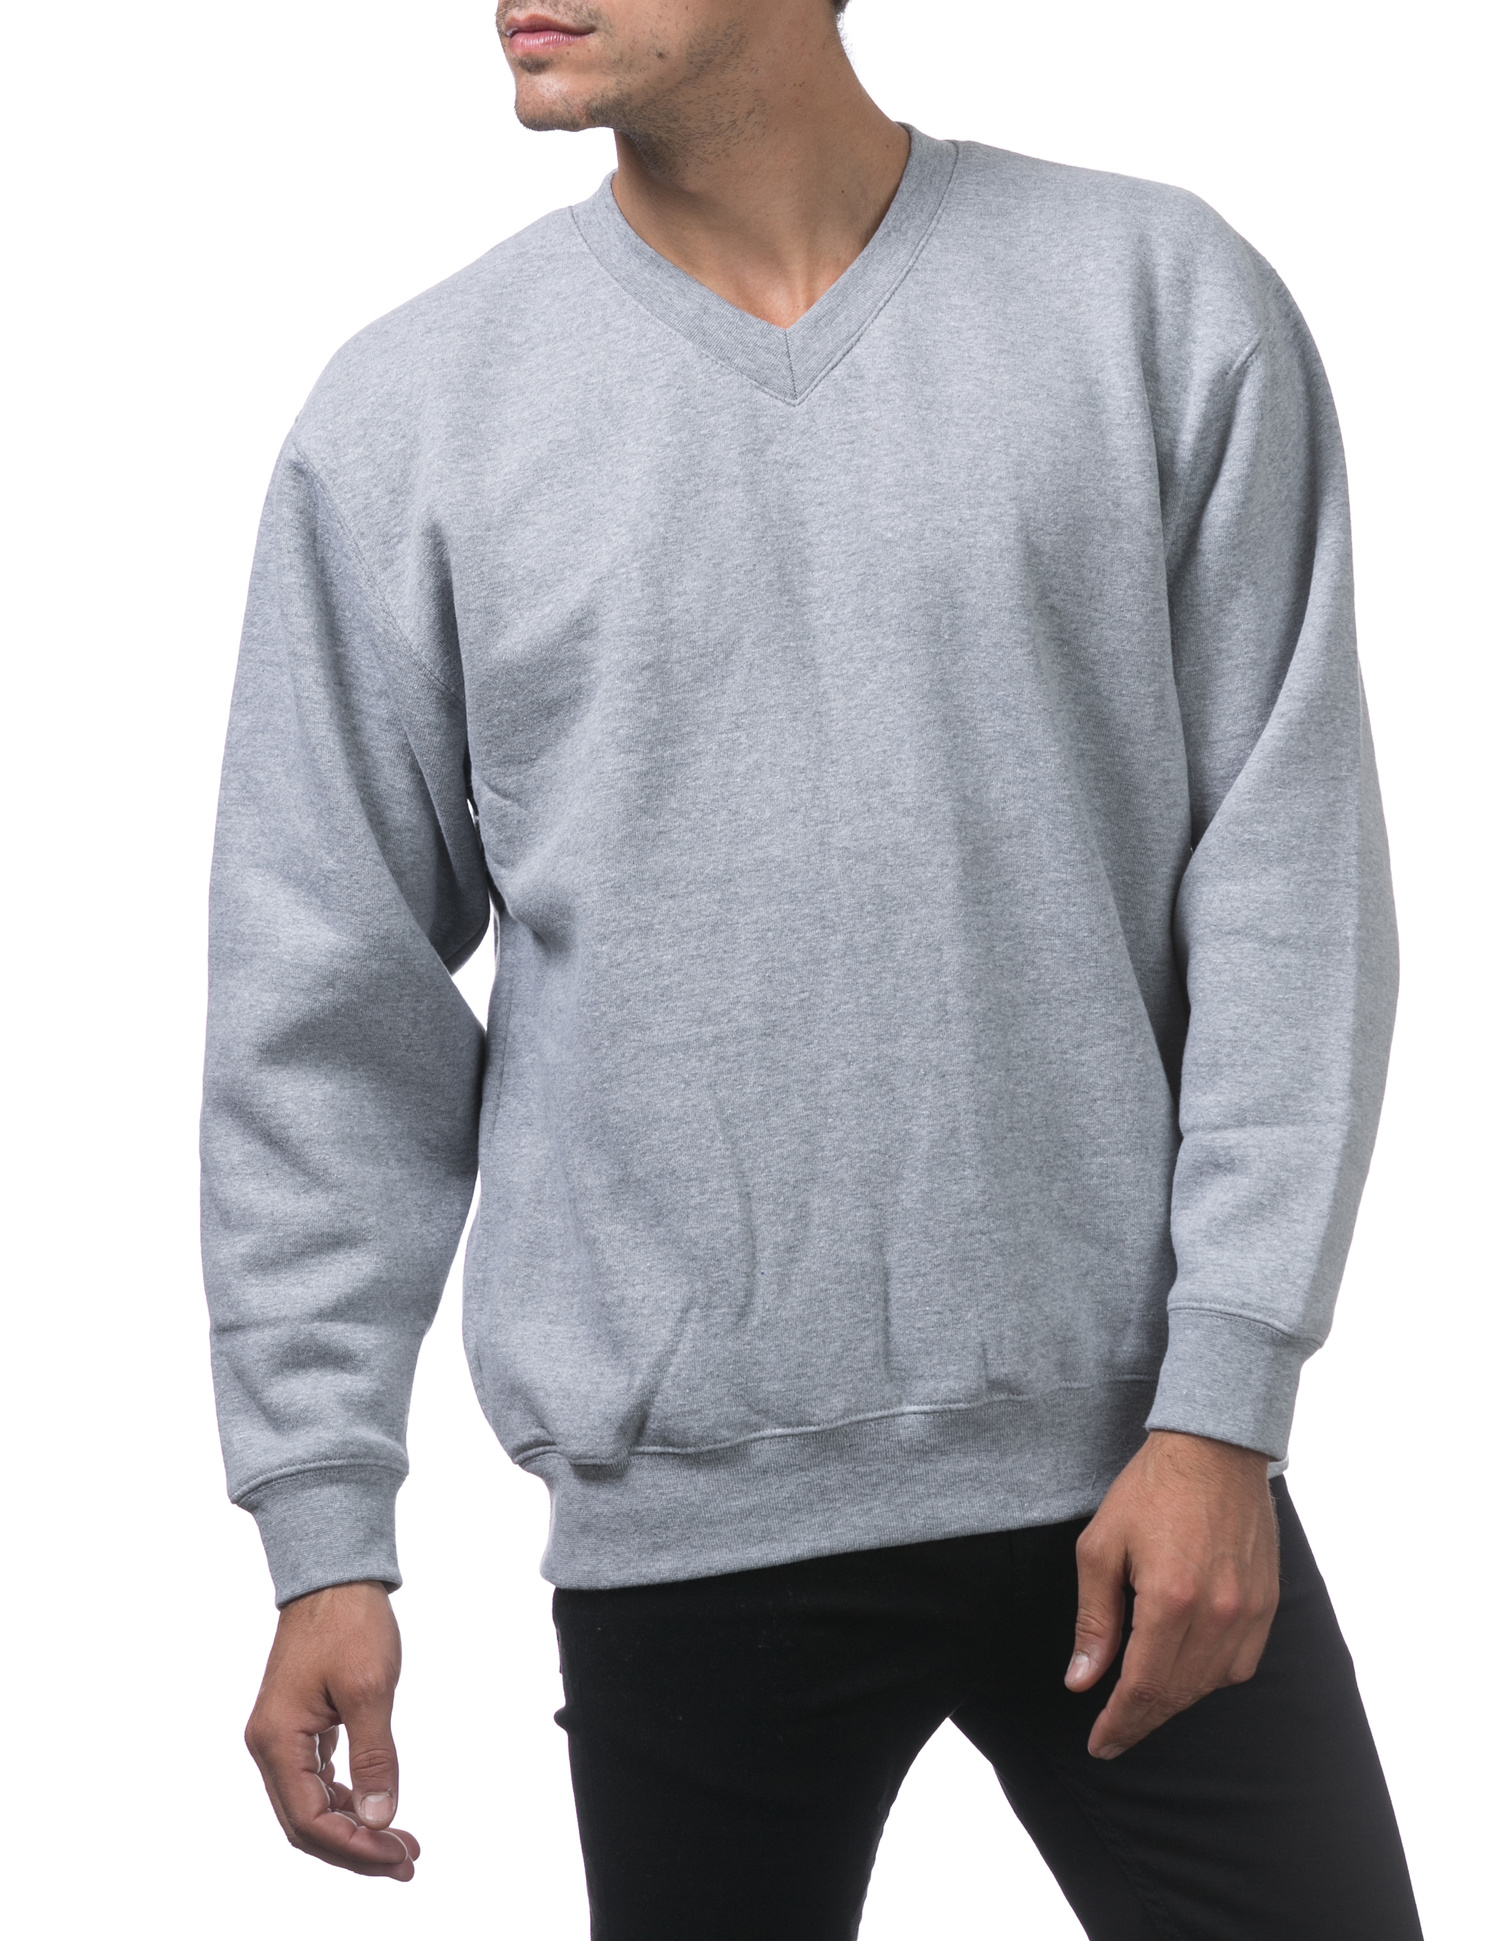 146 H.GRAY Heavyweight V-Neck Pullover Sweater - Sweaters